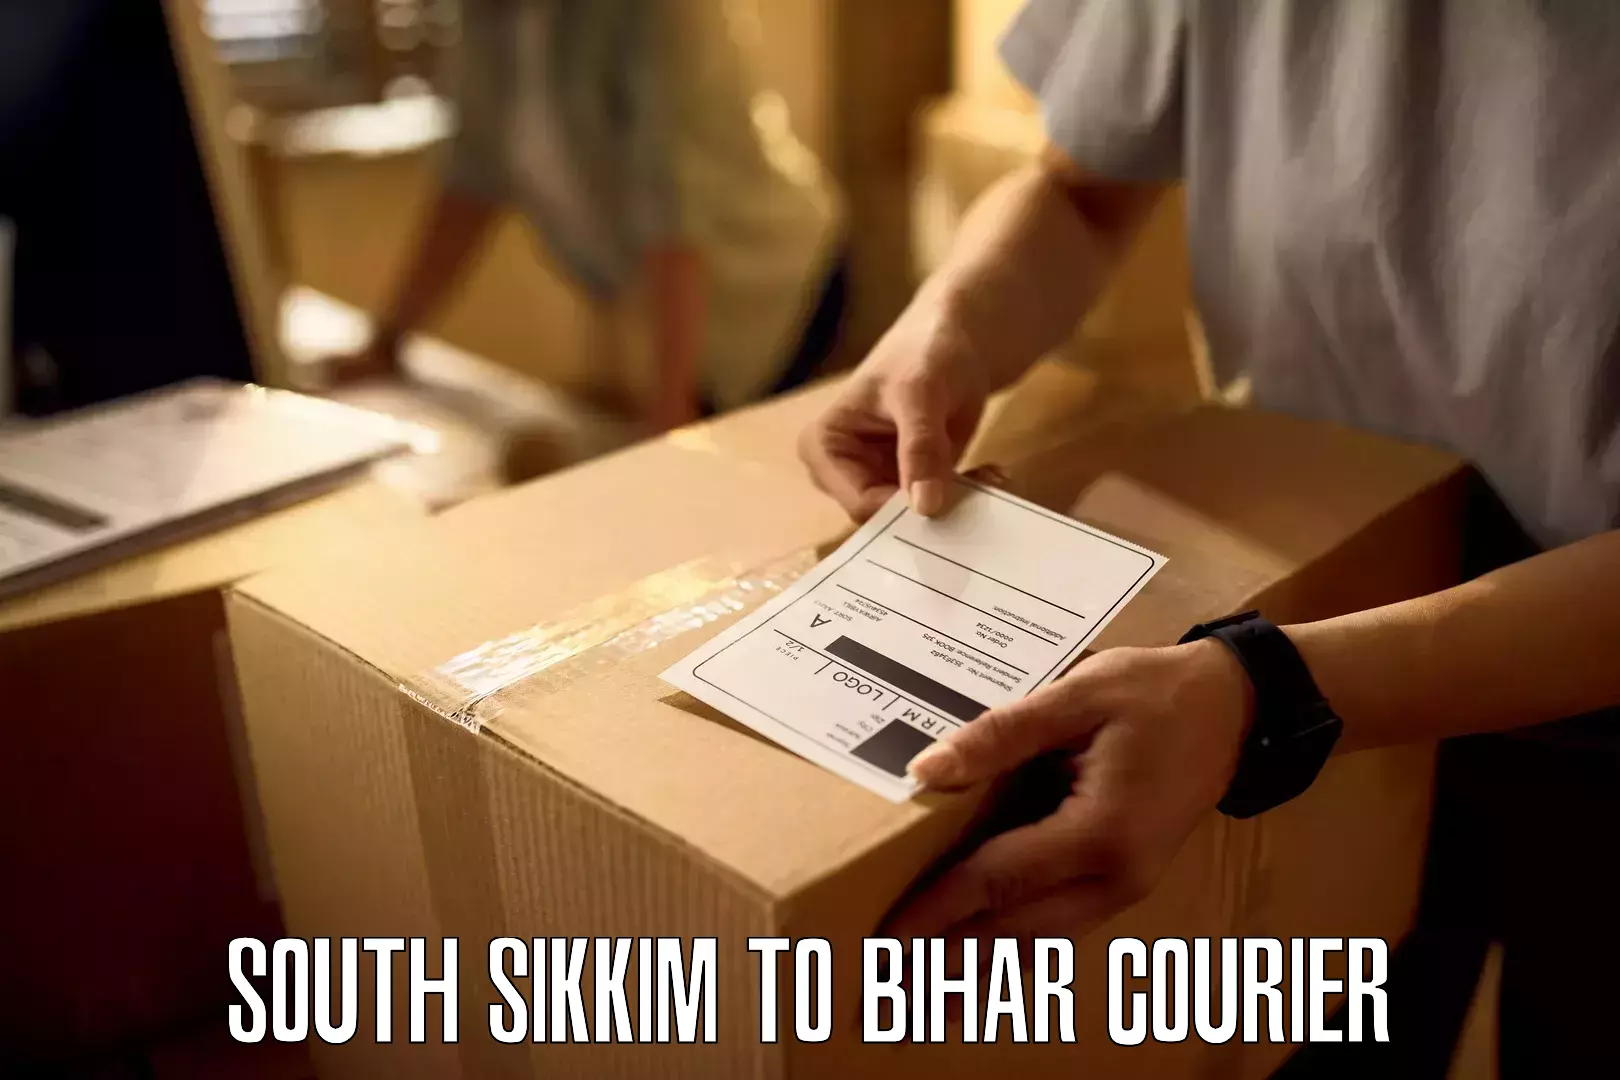 Global shipping networks South Sikkim to Bhorey